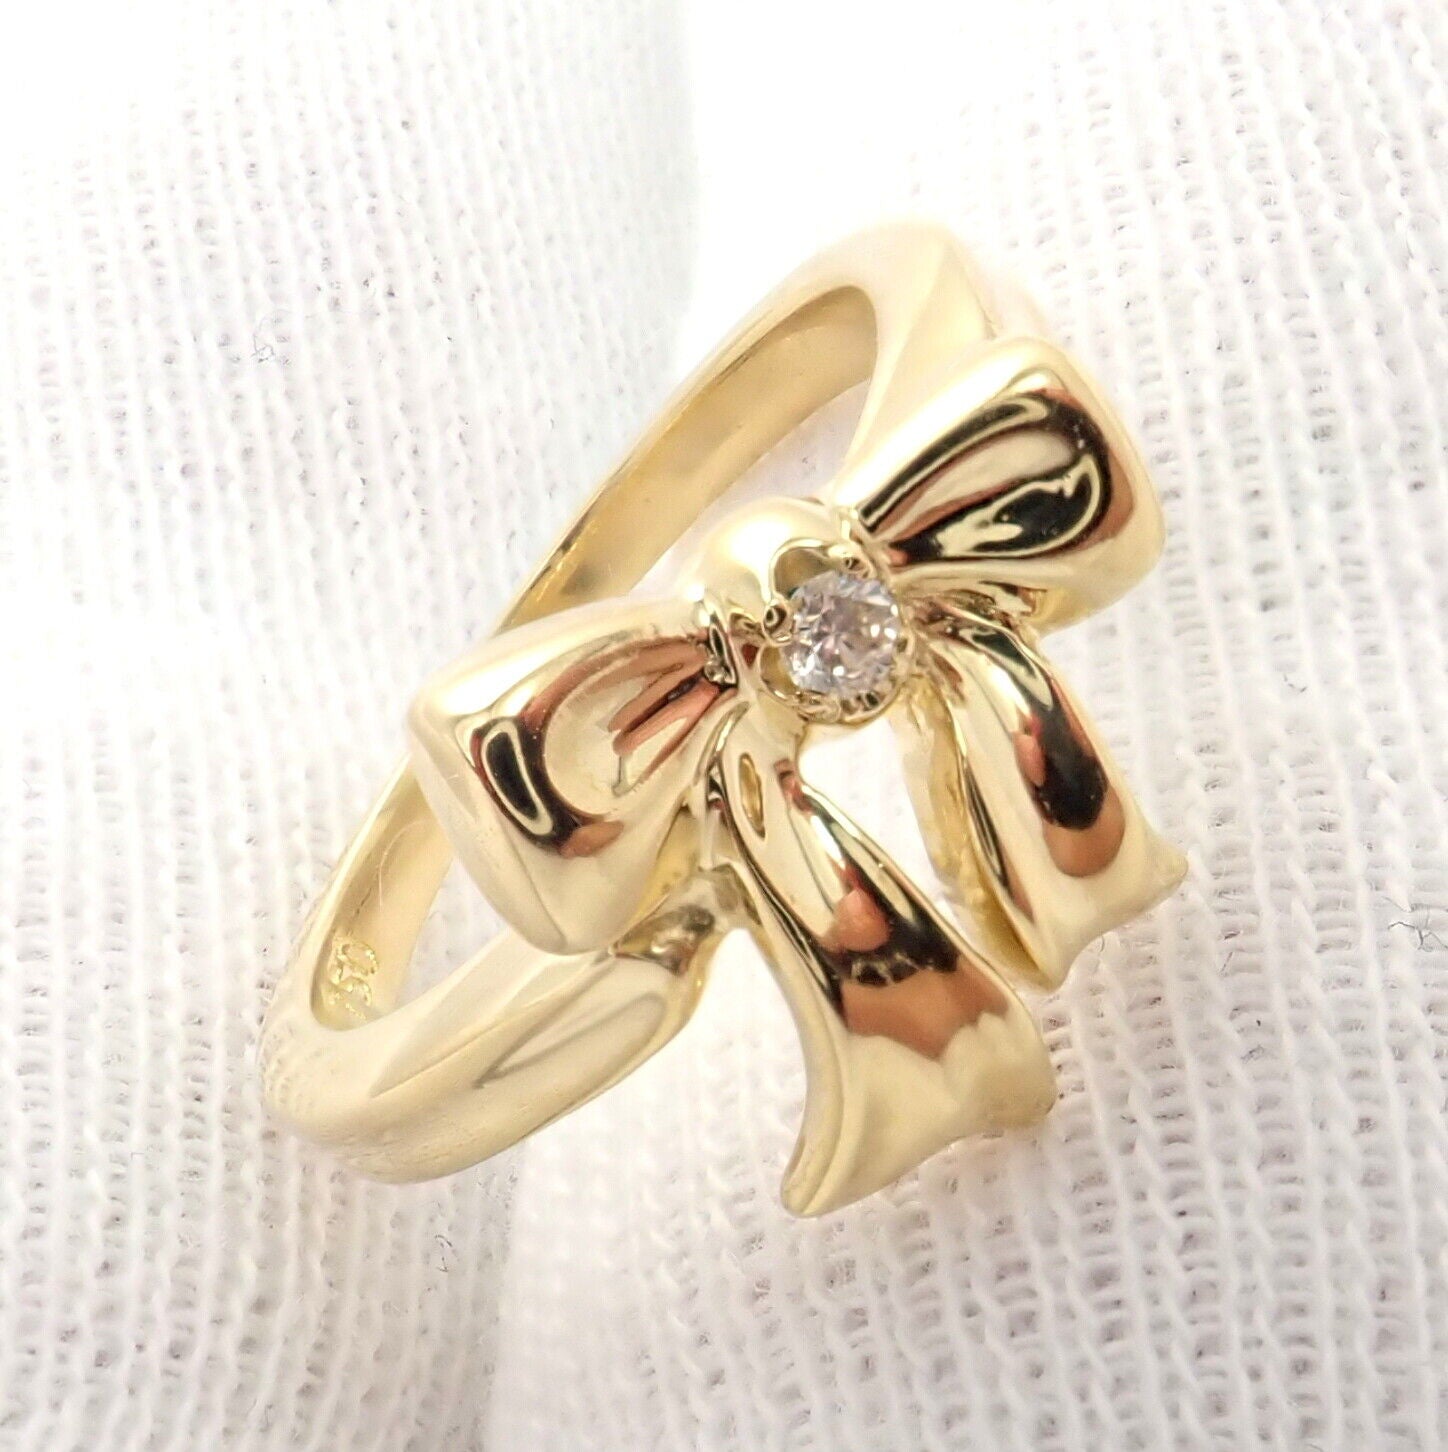 Tiffany & Co Jewelry & Watches:Fine Jewelry:Rings Vintage! Tiffany & Co. 18k Yellow Gold Diamond Ribbon Bow Band Ring